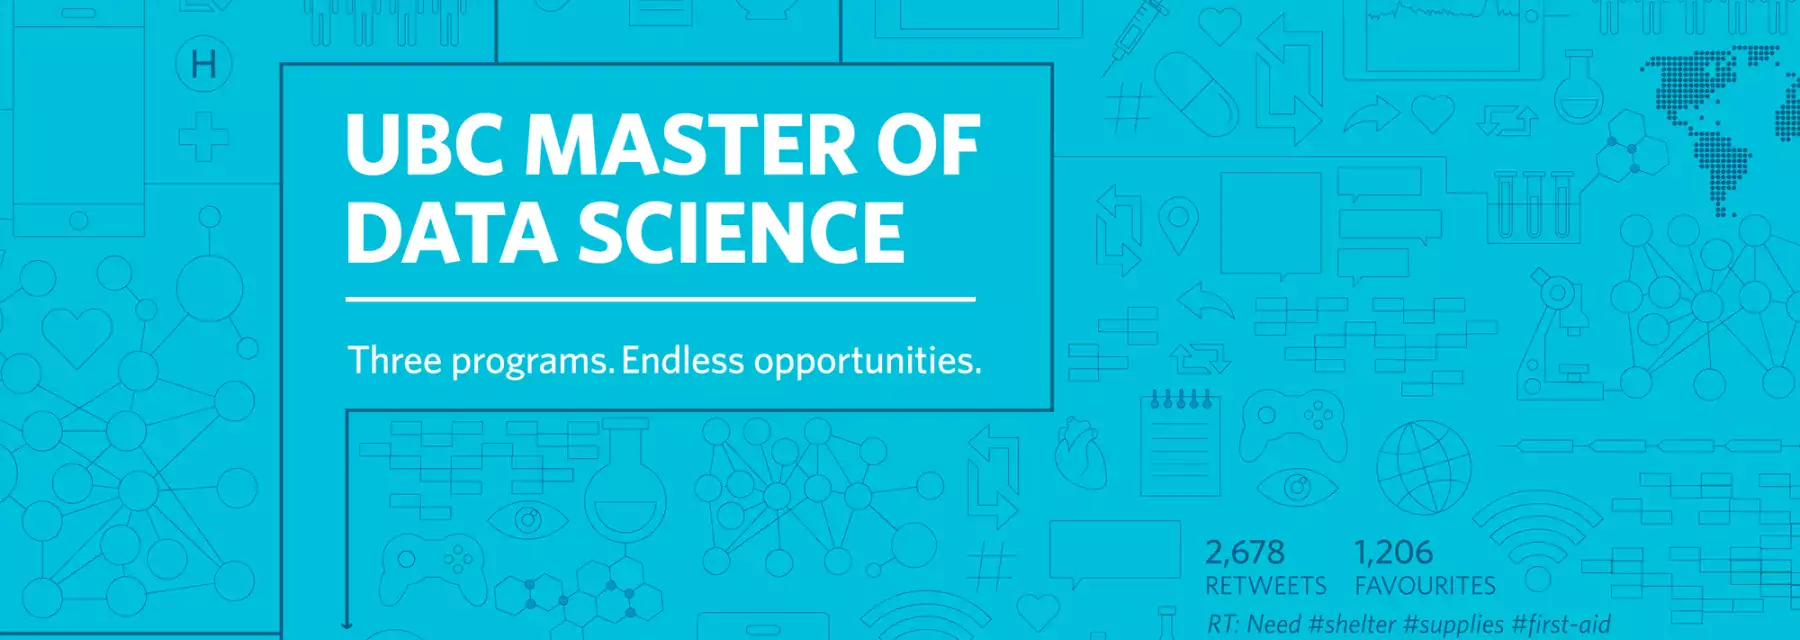 UBC Master of Data Science - Three Programs - Endless Opportunities